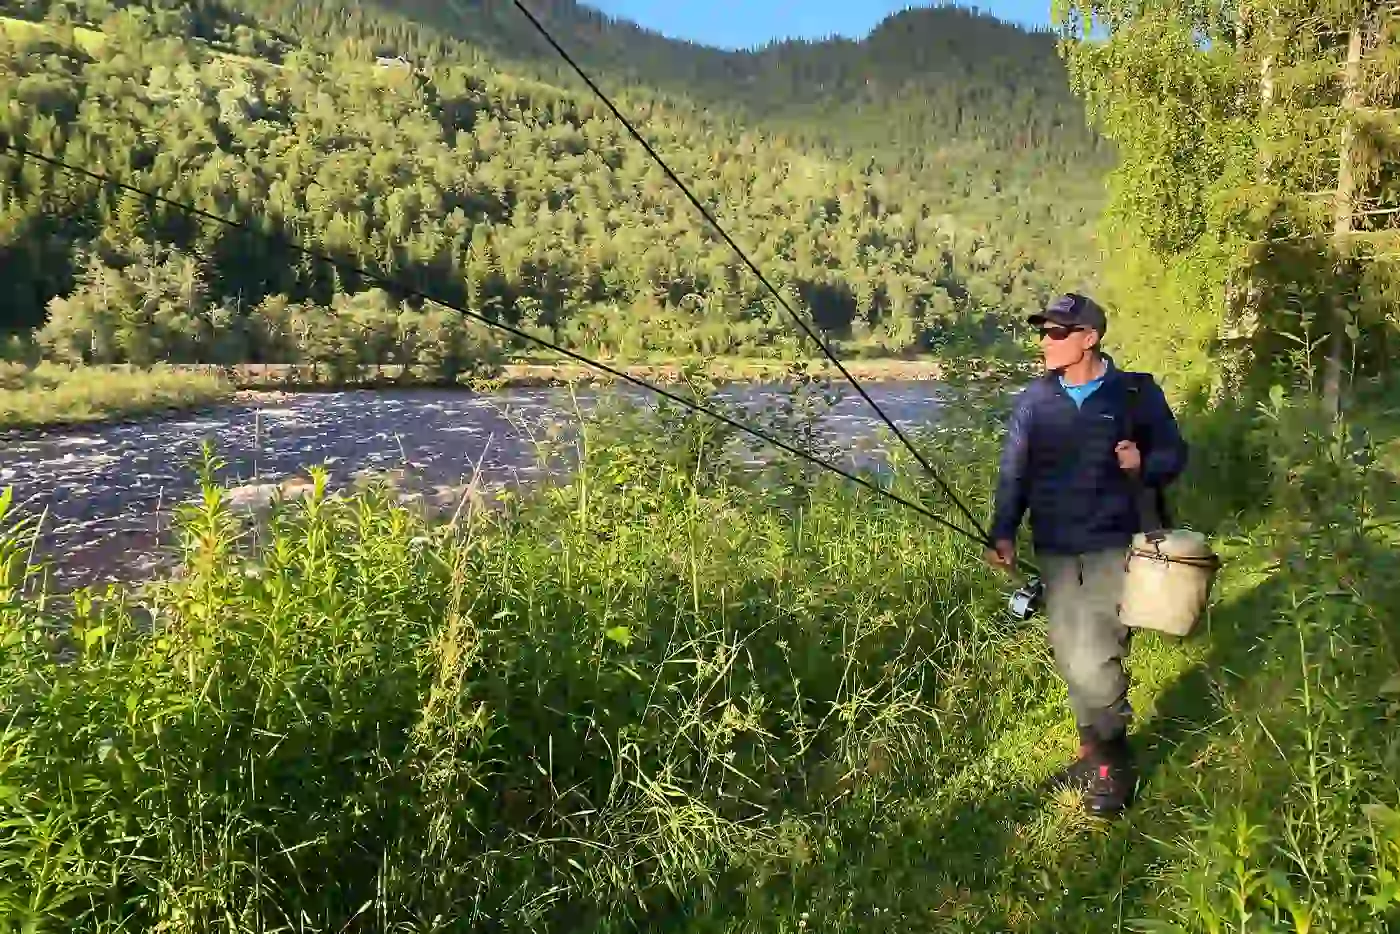 A man is standing on a grassy hill next to a river, fly fishing.